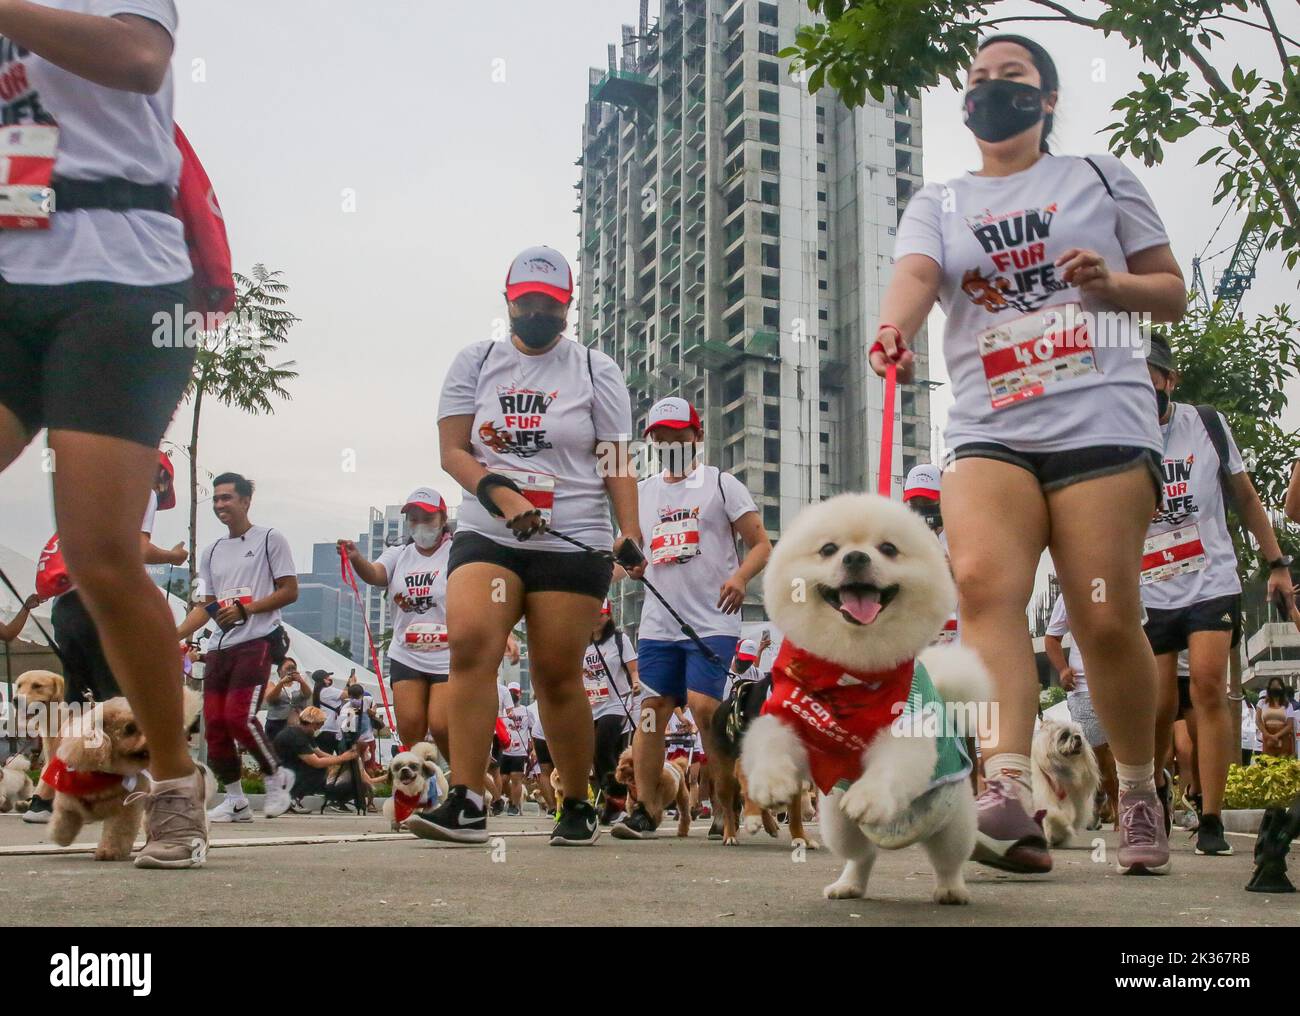 Pasig City, Philippines. 25th Sep, 2022. Dogs run with their owners during the 'Run Fur Life' marathon in Pasig City, the Philippines, Sept. 25, 2022. The 'Run Fur Life' is a fundraising event for the benefit of maltreated, abandoned, and homeless dogs and also aims to promote animal welfare and responsible pet ownership. Credit: Rouelle Umali/Xinhua/Alamy Live News Stock Photo